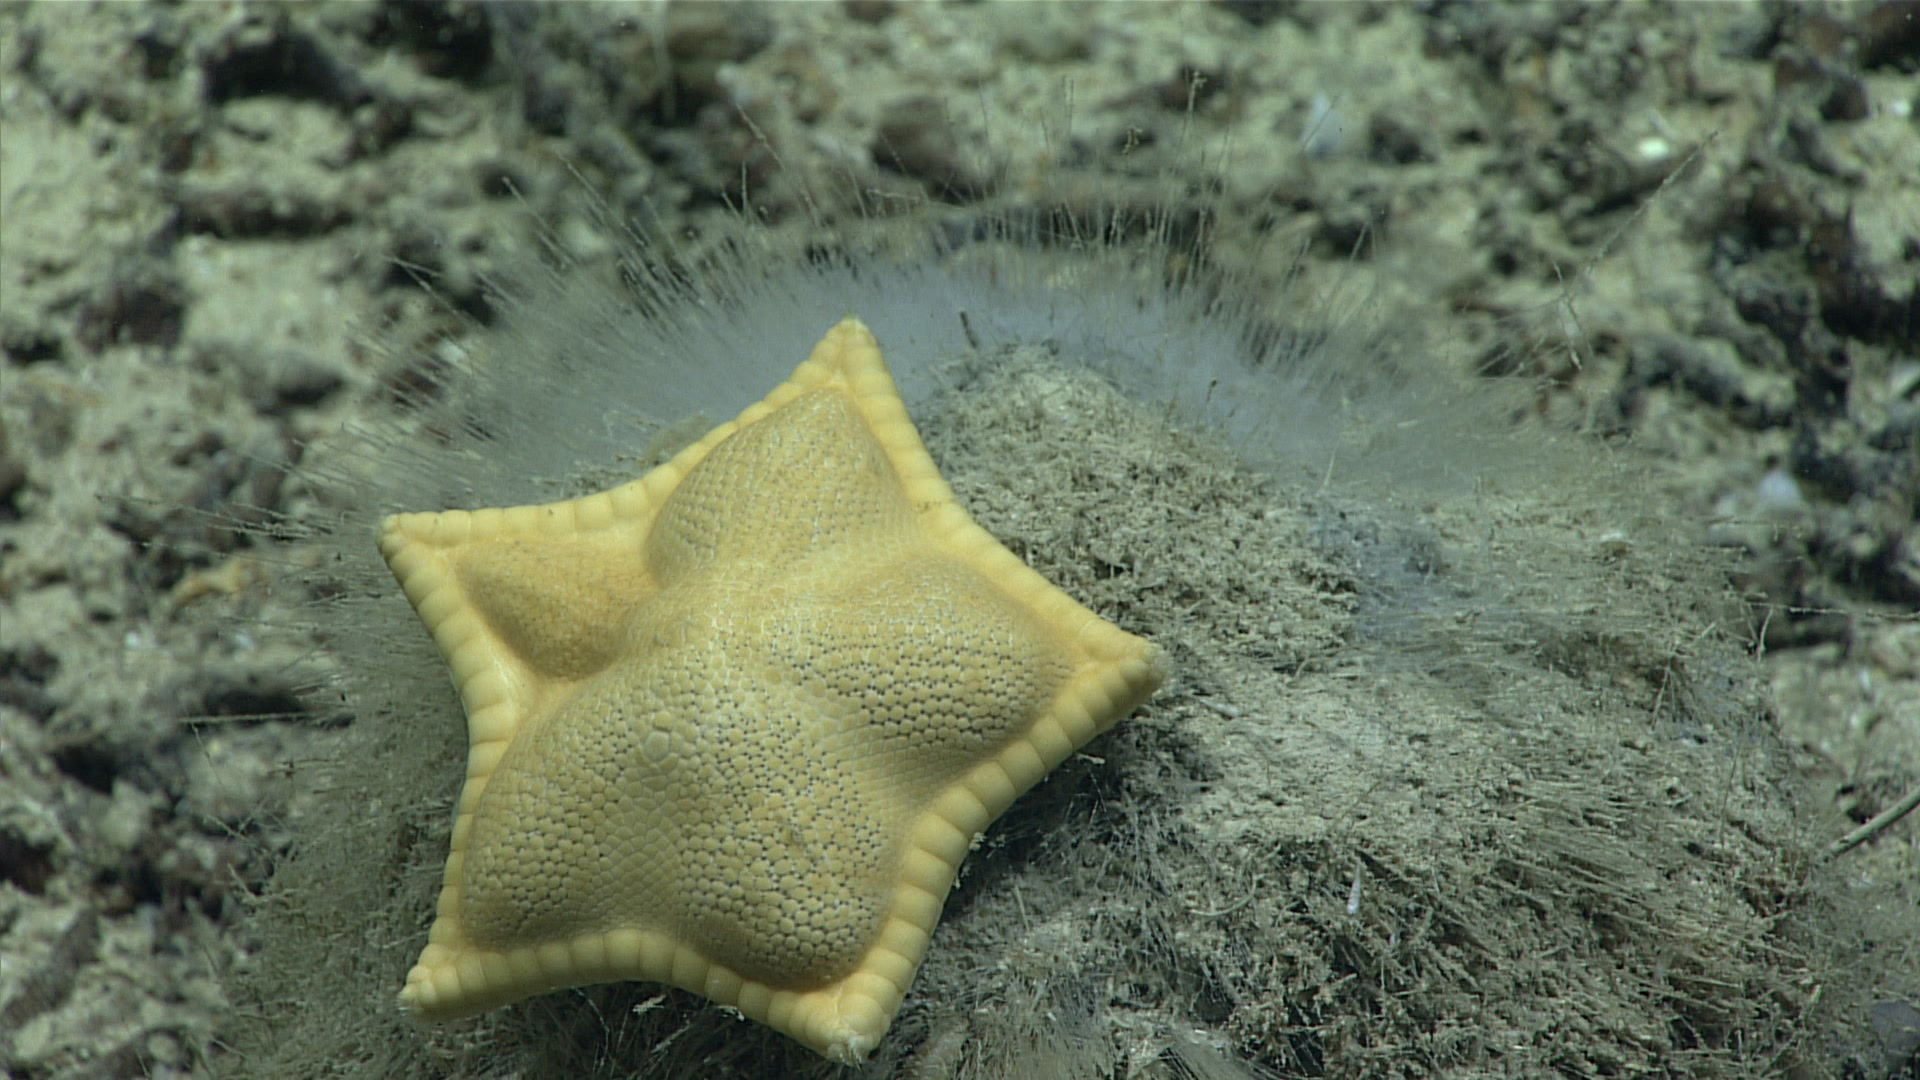 Plinthaster dentatus, the spongivorous 'cookie' or 'ravioli' star. (Image courtesy of the NOAA Office of Ocean Exploration and Research)